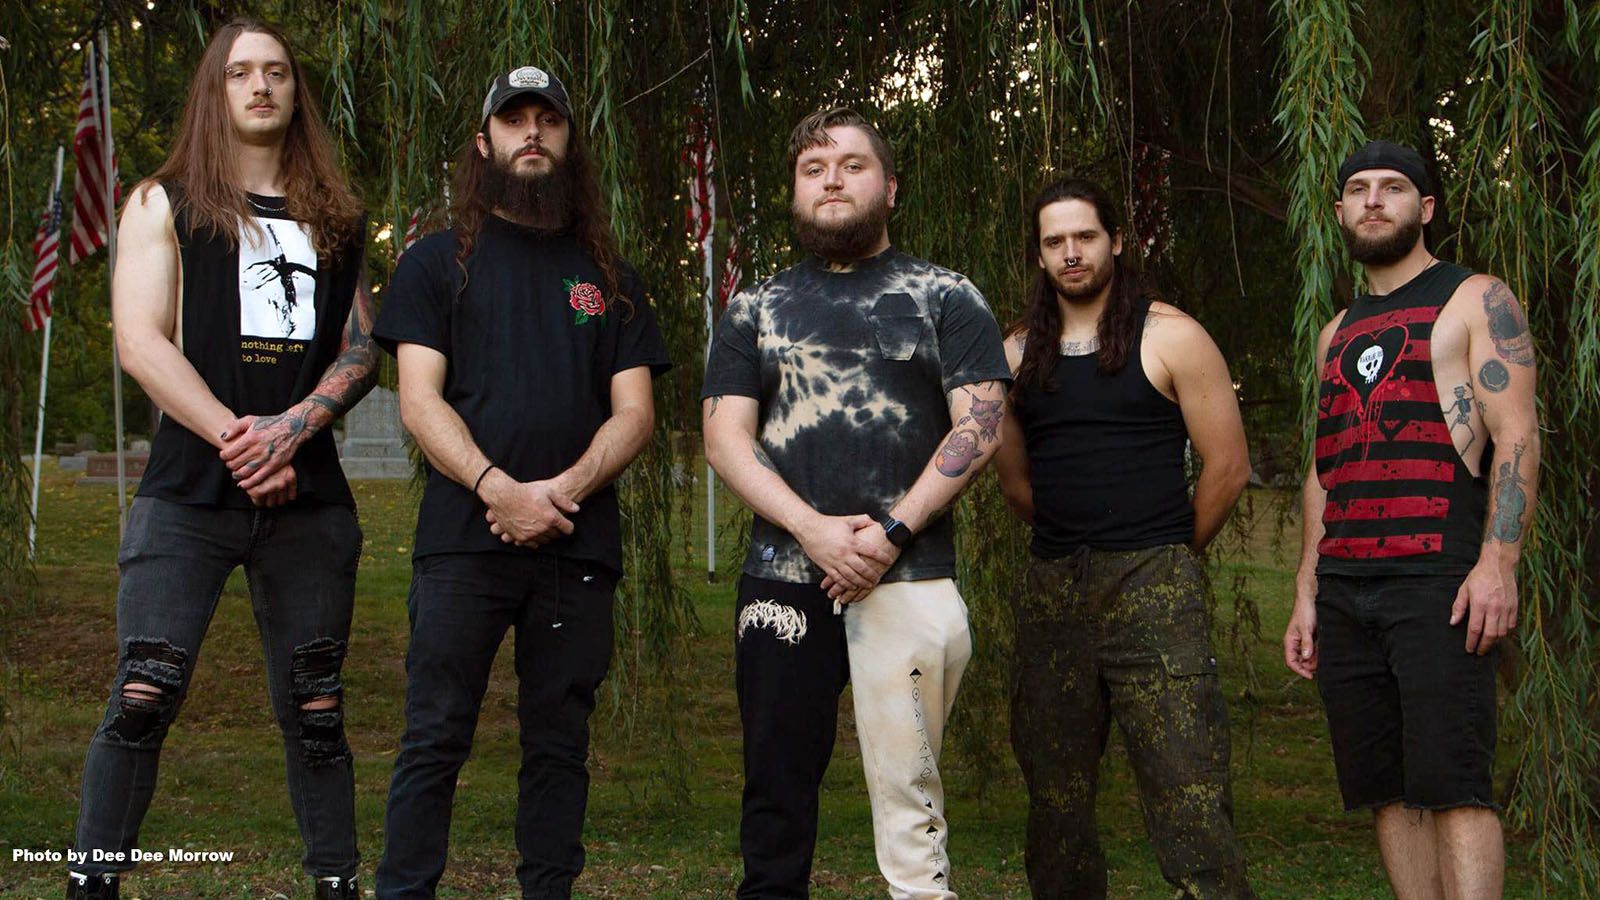 Anti-Clutch have added a second guitarist, with Austin Gardner, far left, joining the group of, from left, Azhton Tucker, Tyler Jones, Gabriel Talamantes, and Zachary Lahrman.